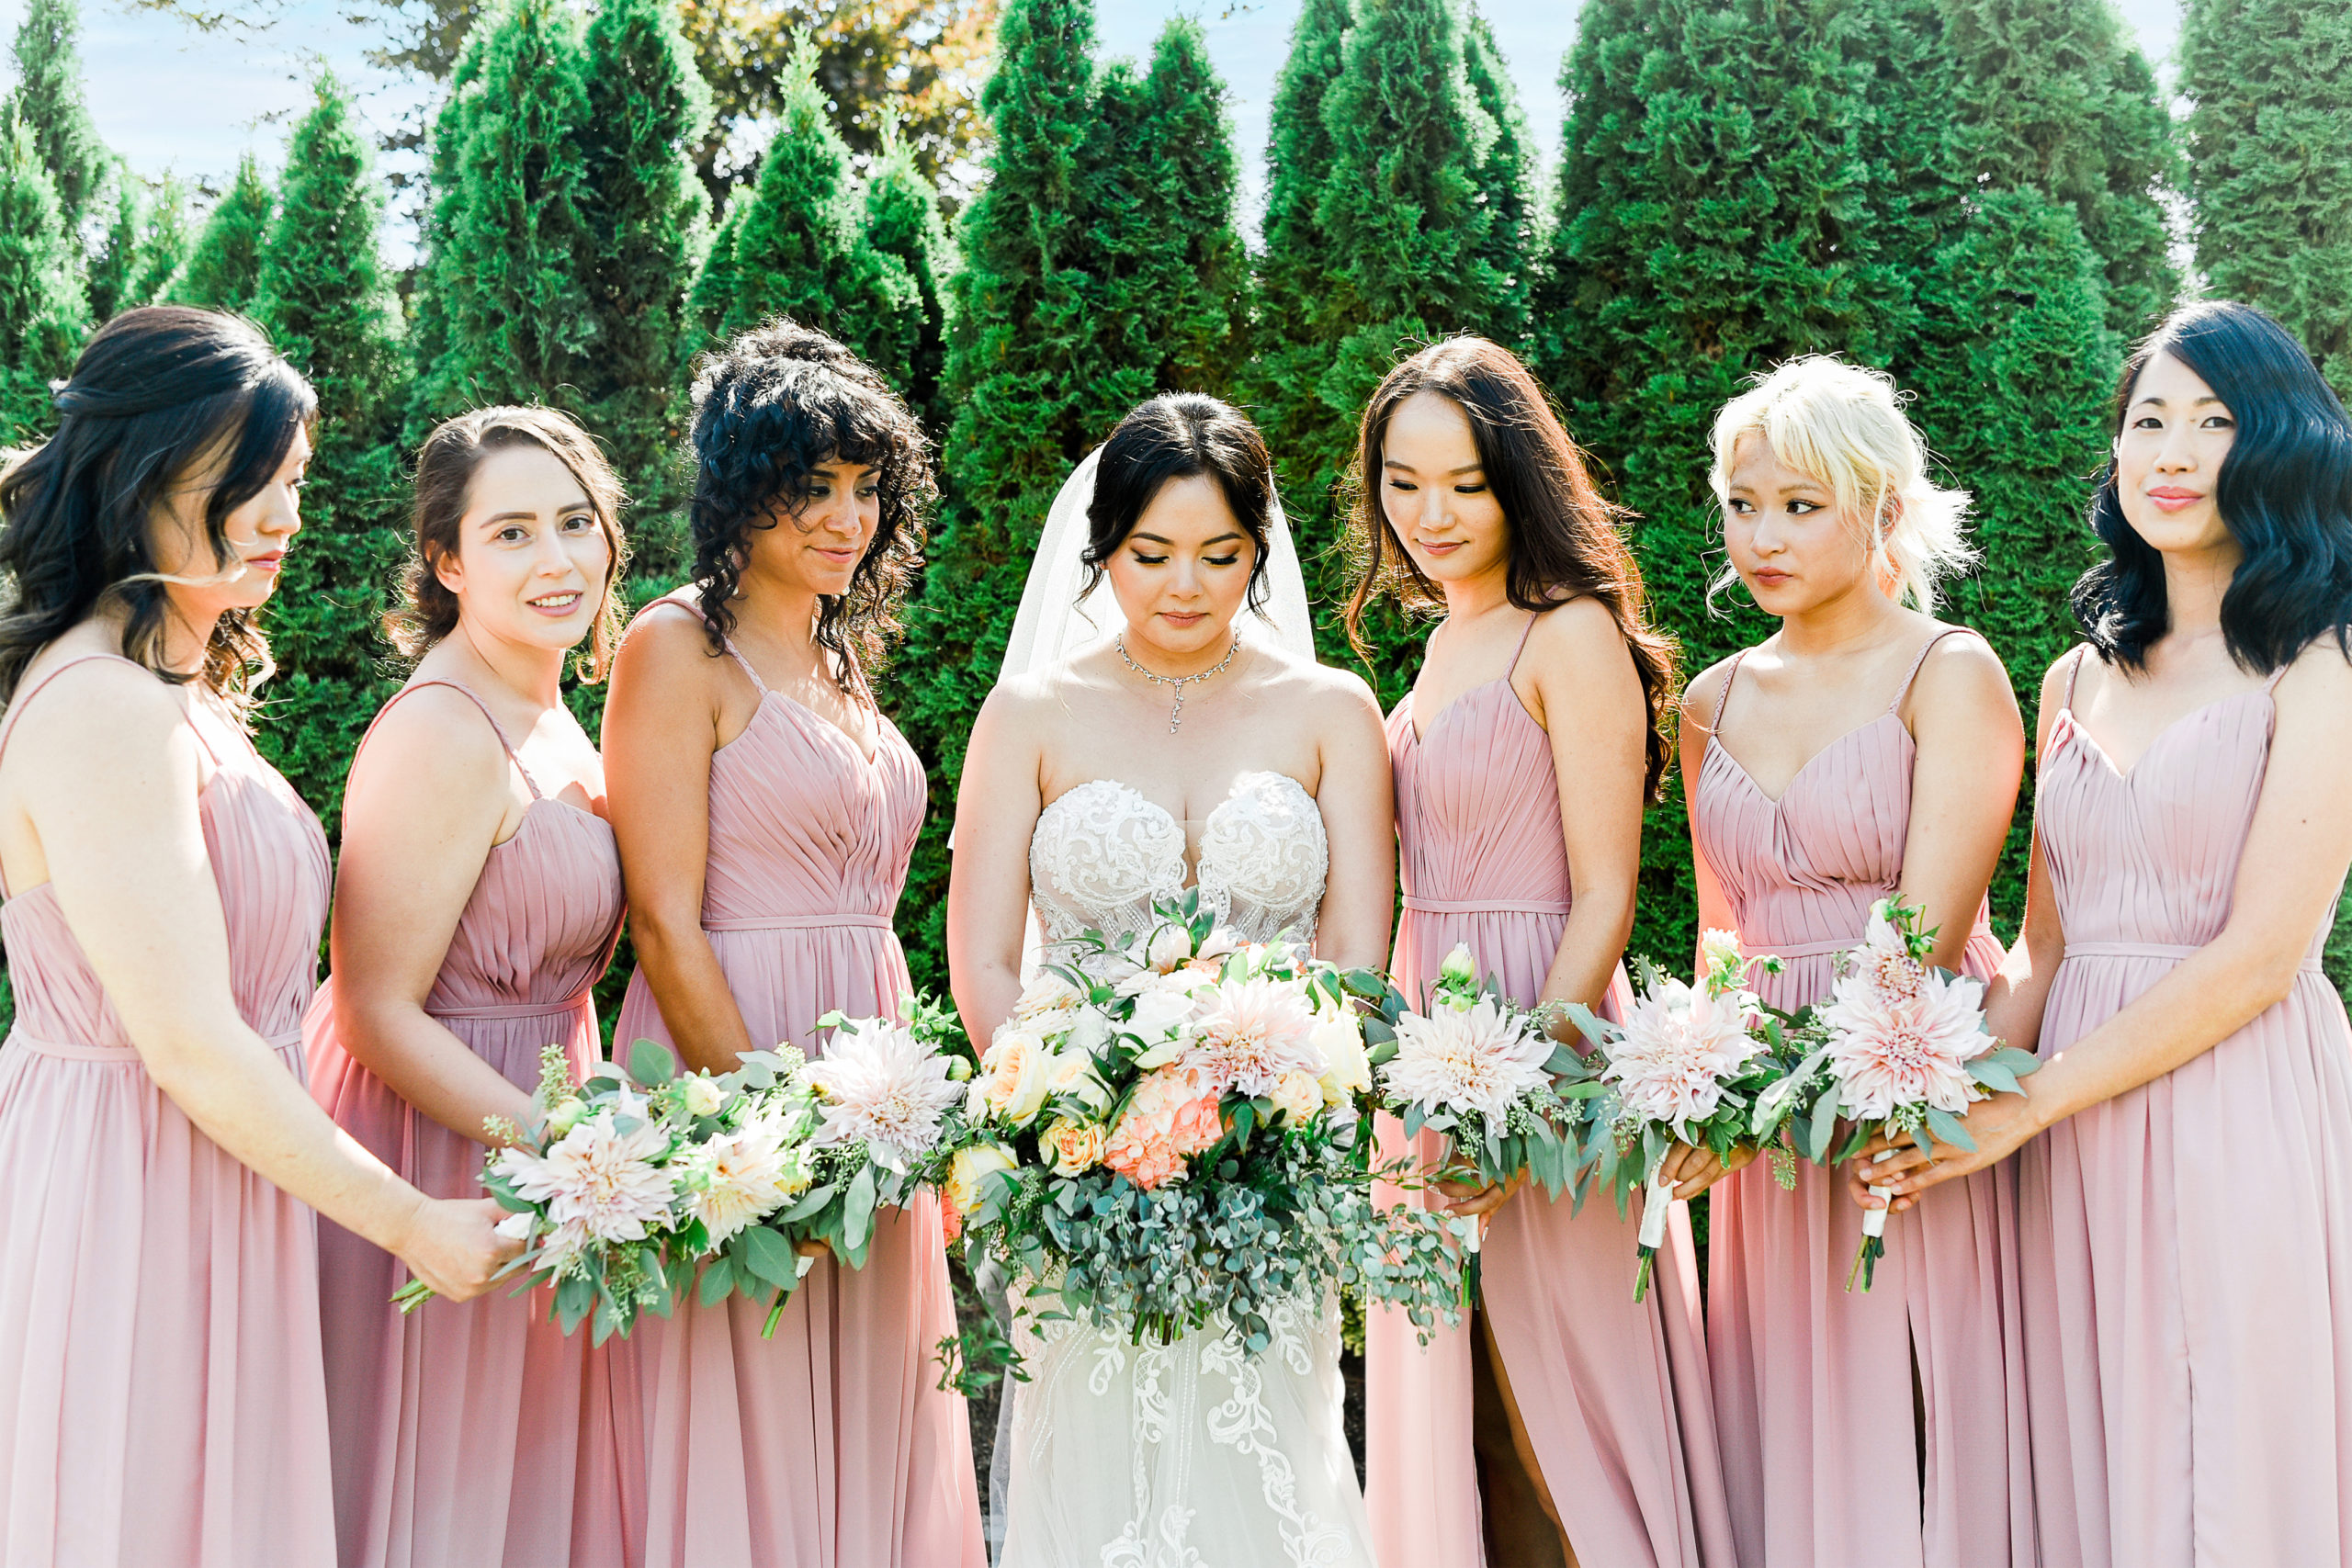 Bridesmaids posing with bouquets at Lord Hills Farms Wedding Venue in Seattle, Washington.